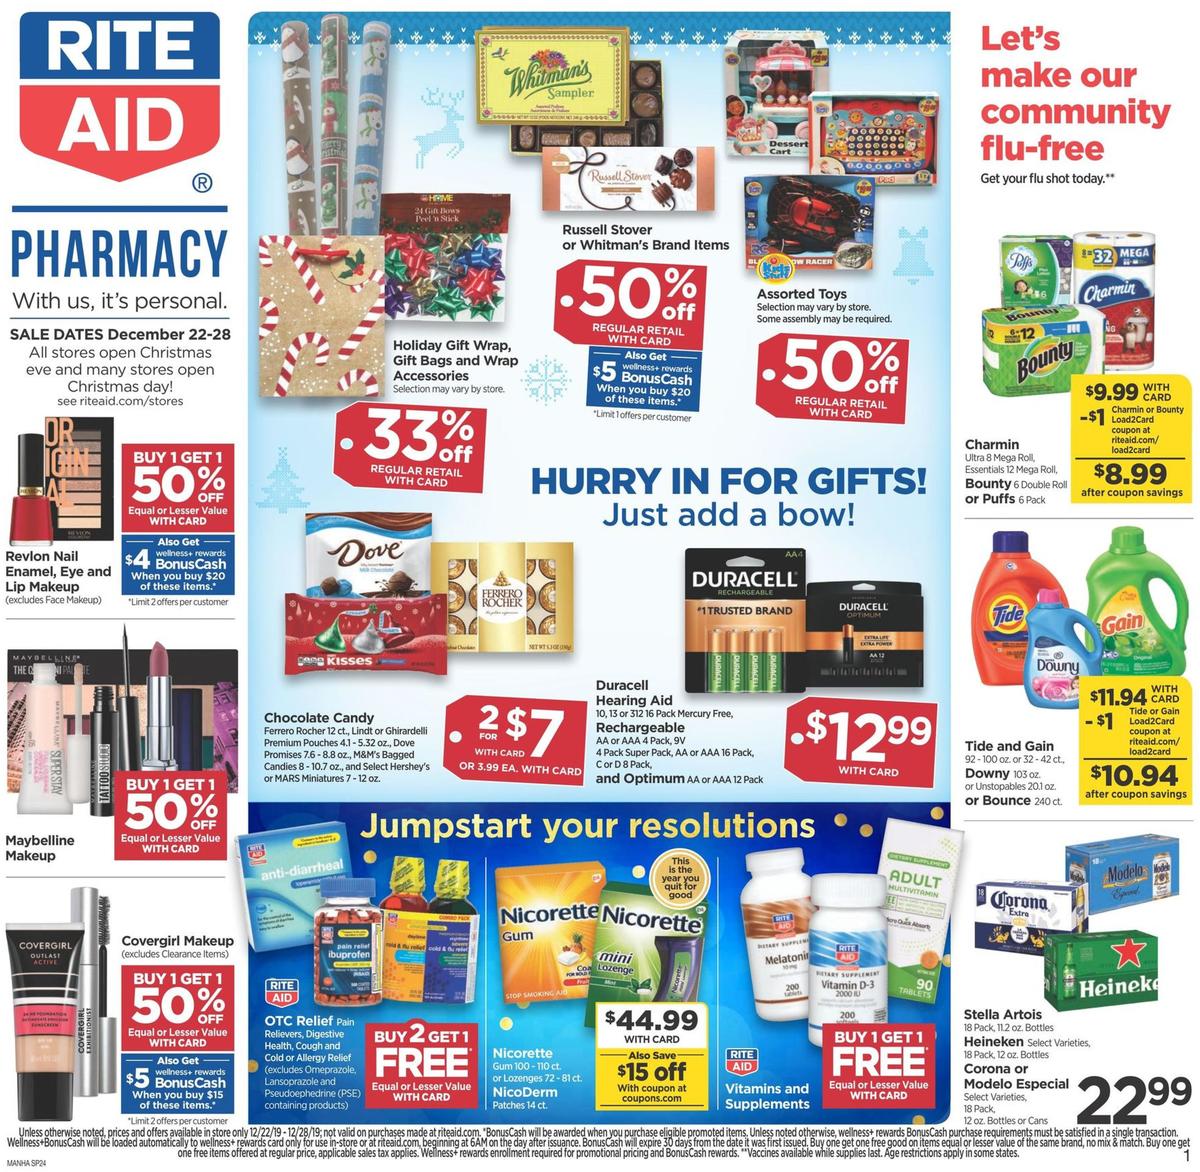 Rite Aid Weekly Ad from December 22